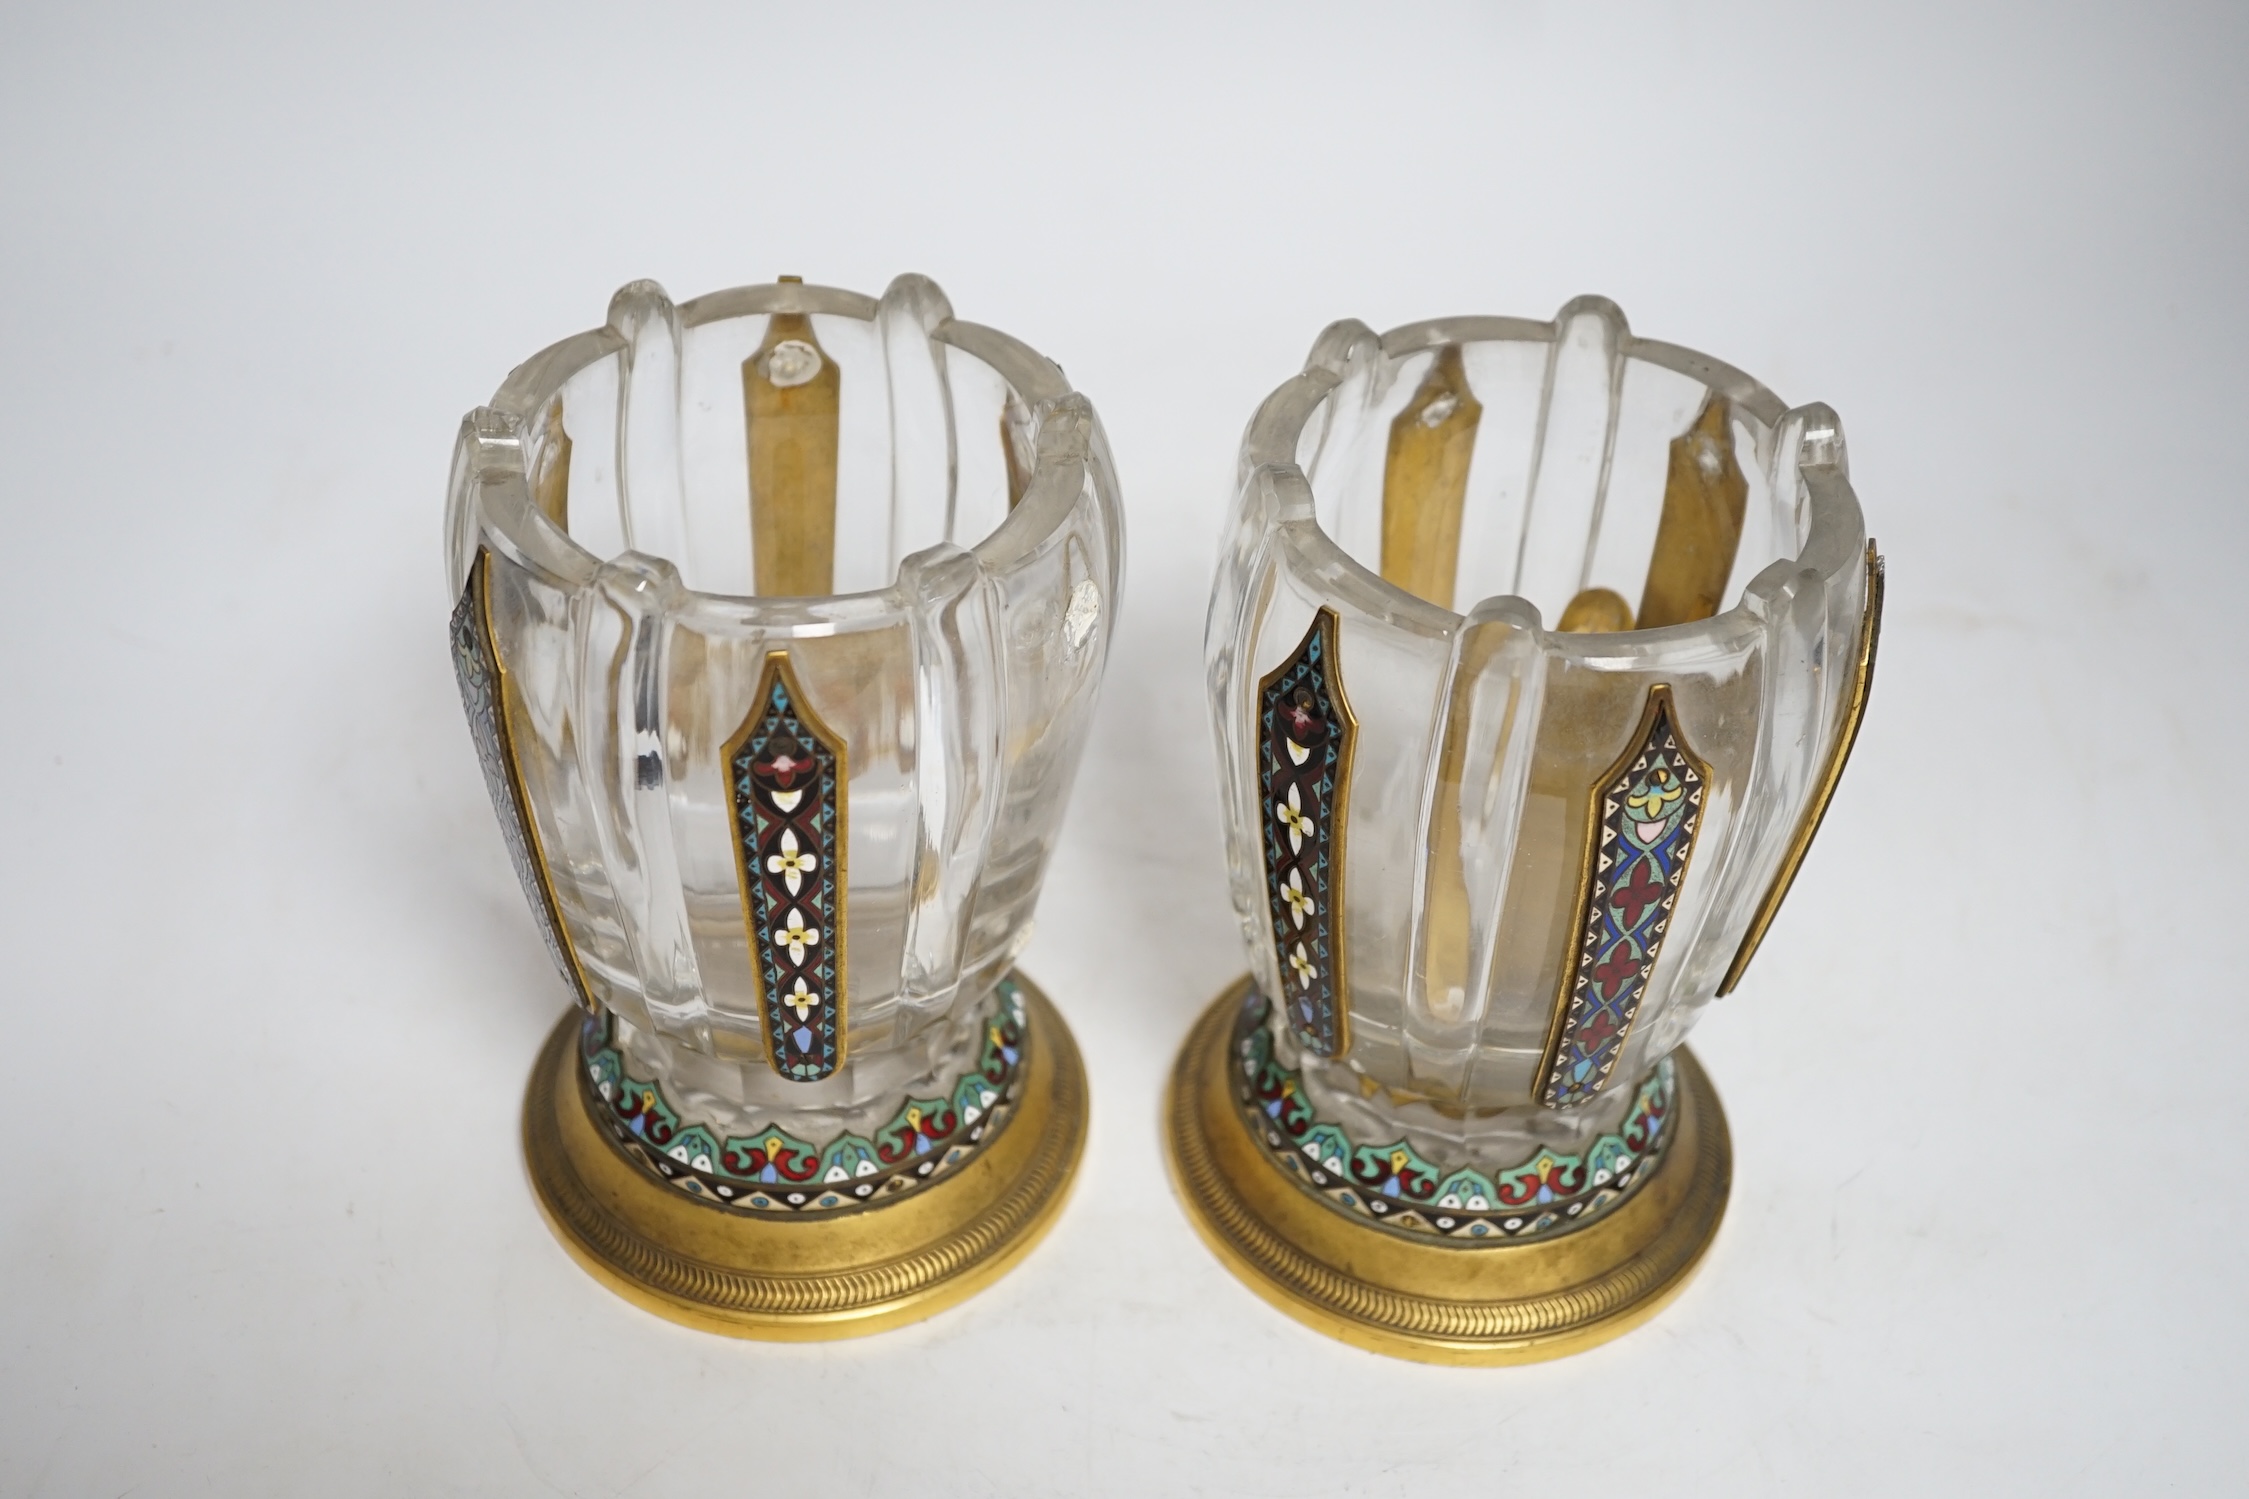 A pair of Barbedienne glass vases with champlevé enamel panels, 16.5cm high